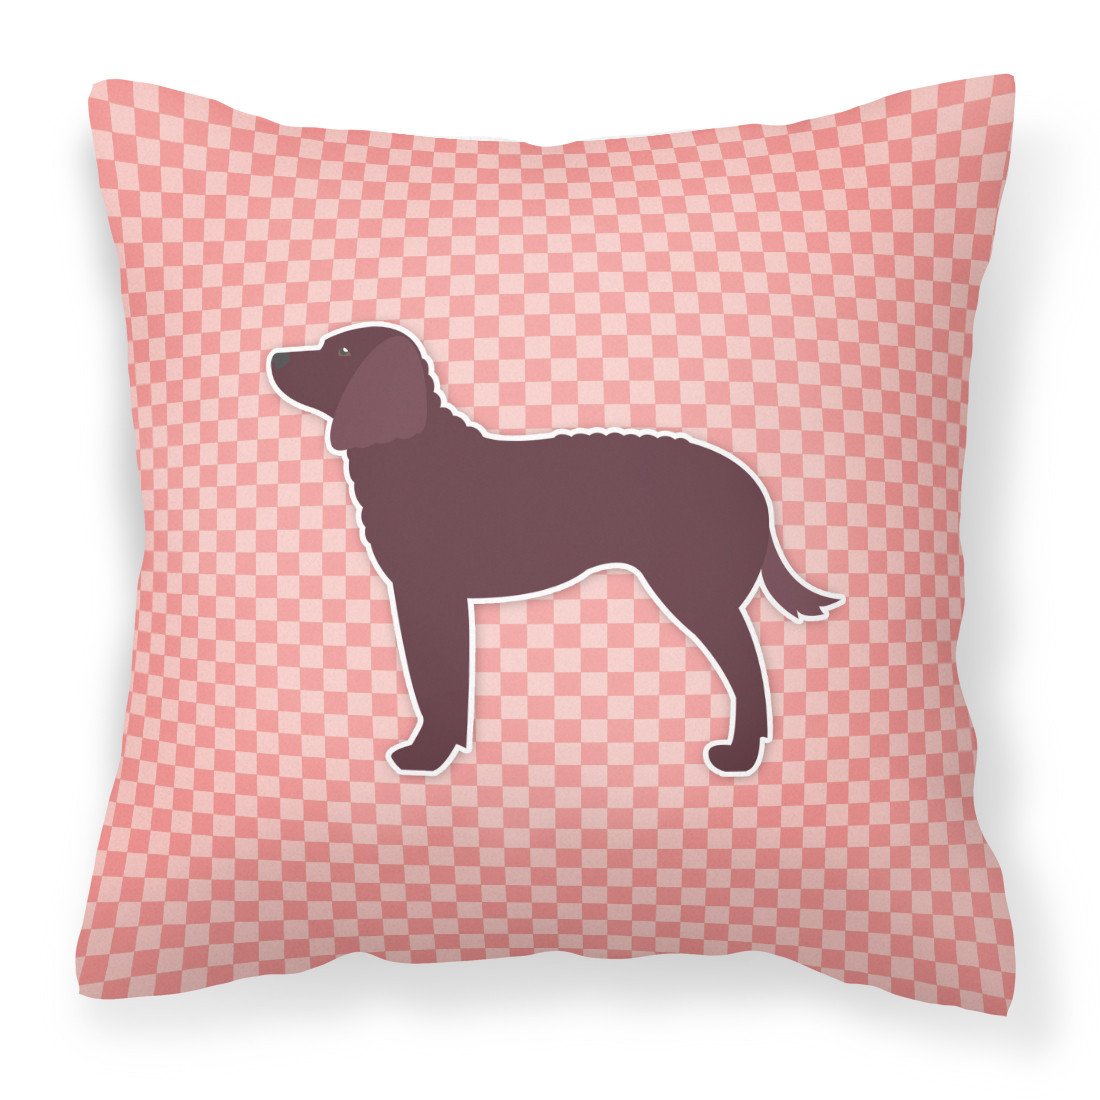 American Water Spaniel Checkerboard Pink Fabric Decorative Pillow BB3601PW1818 by Caroline's Treasures